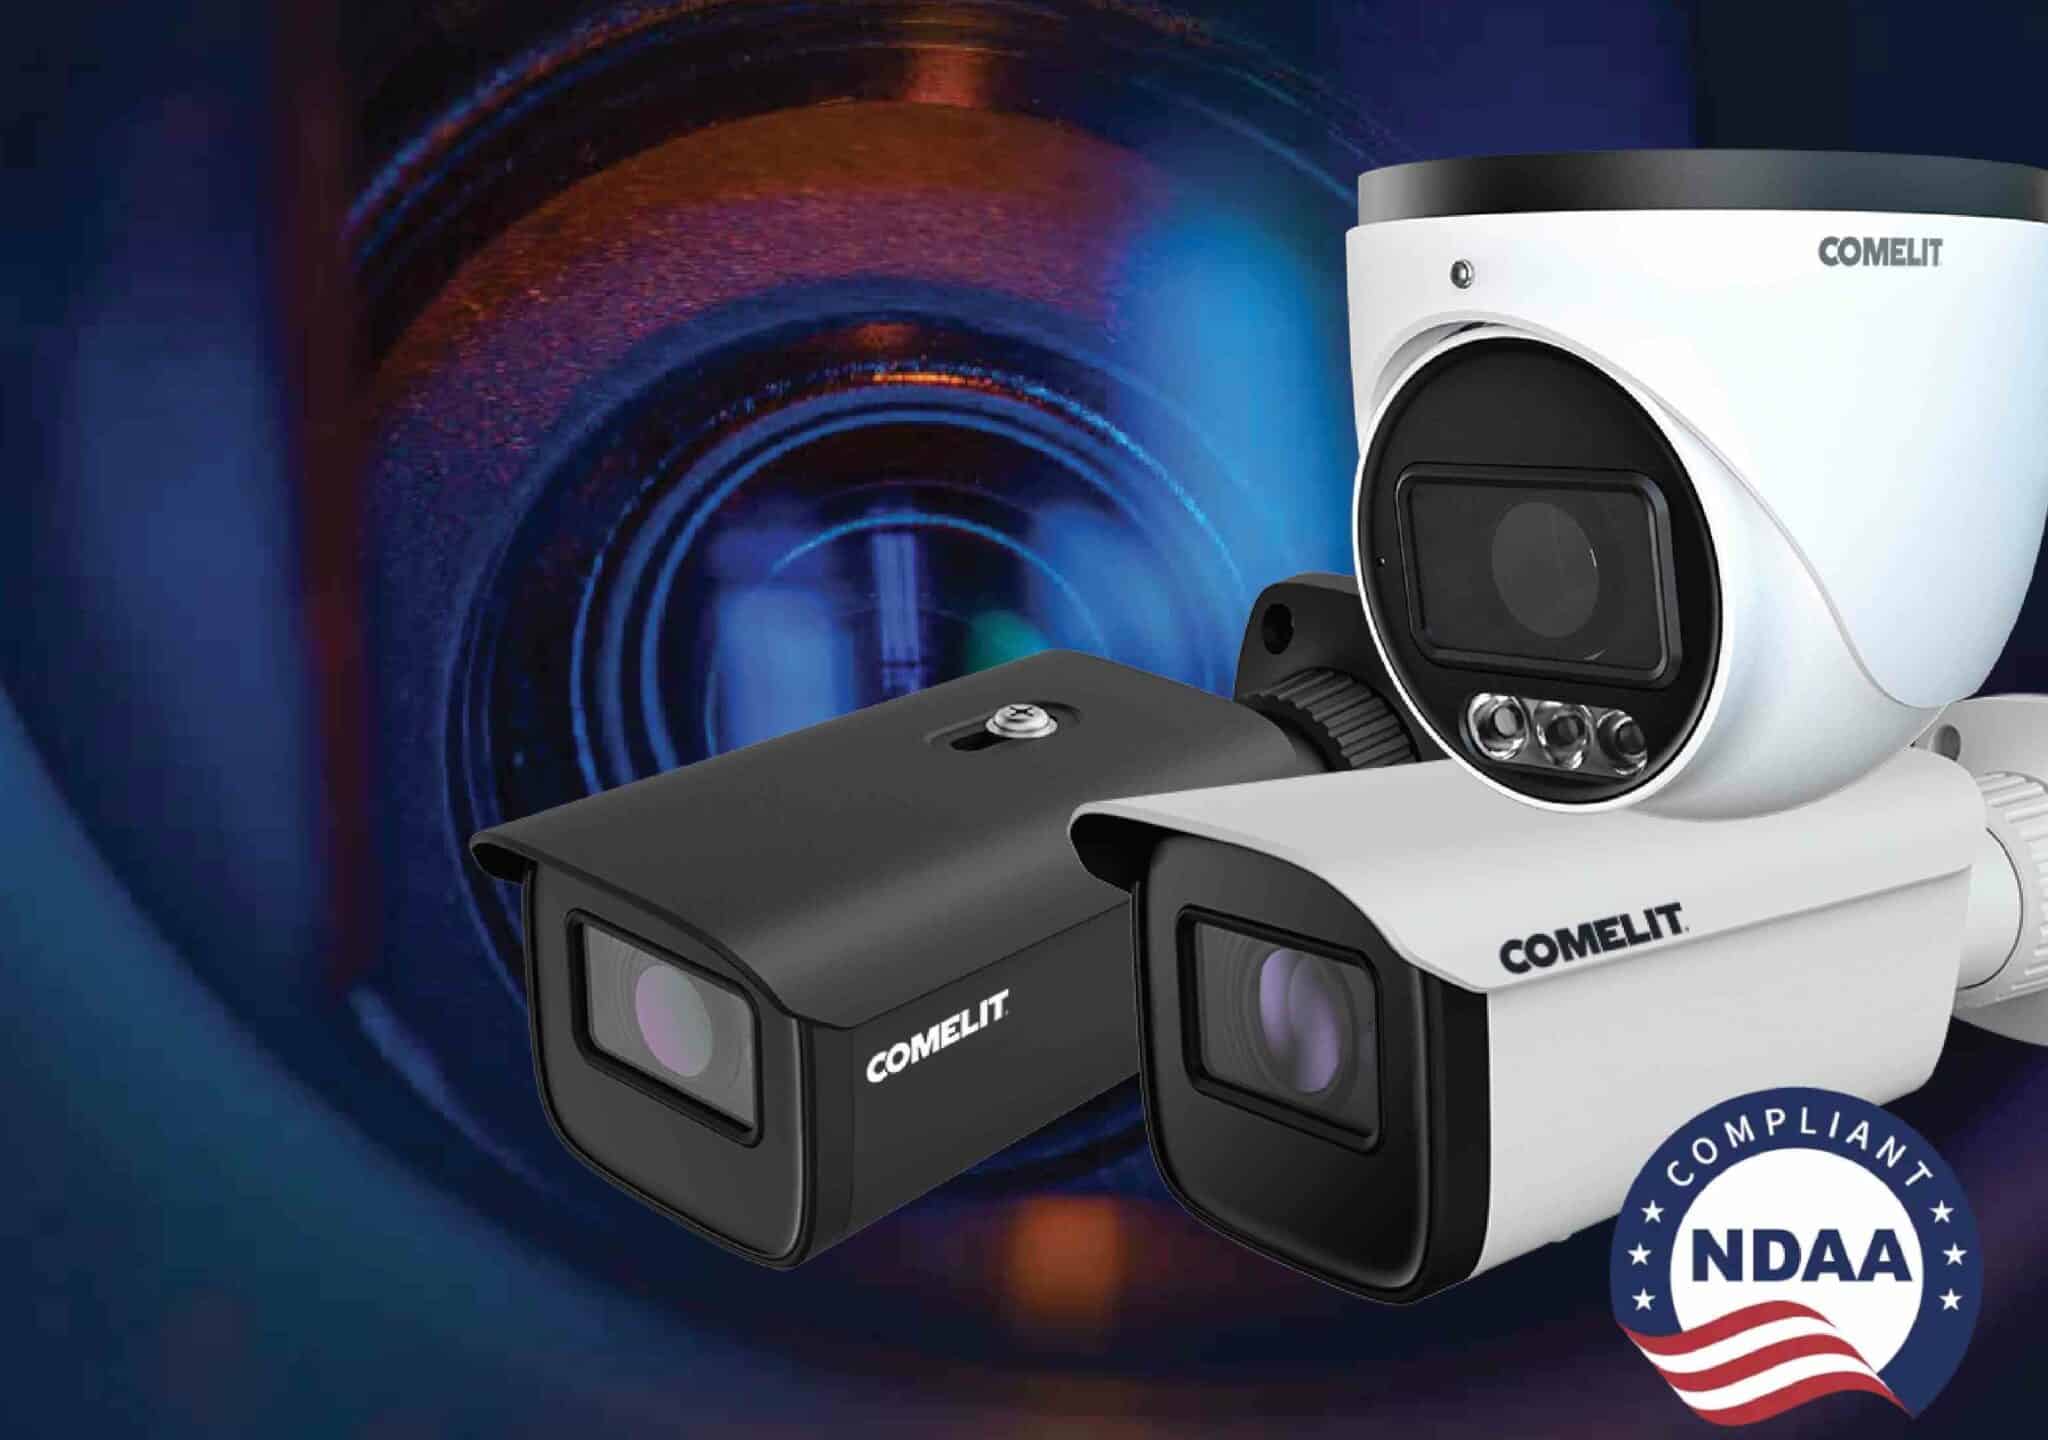 New NDAA compliant CCTV products unveiled